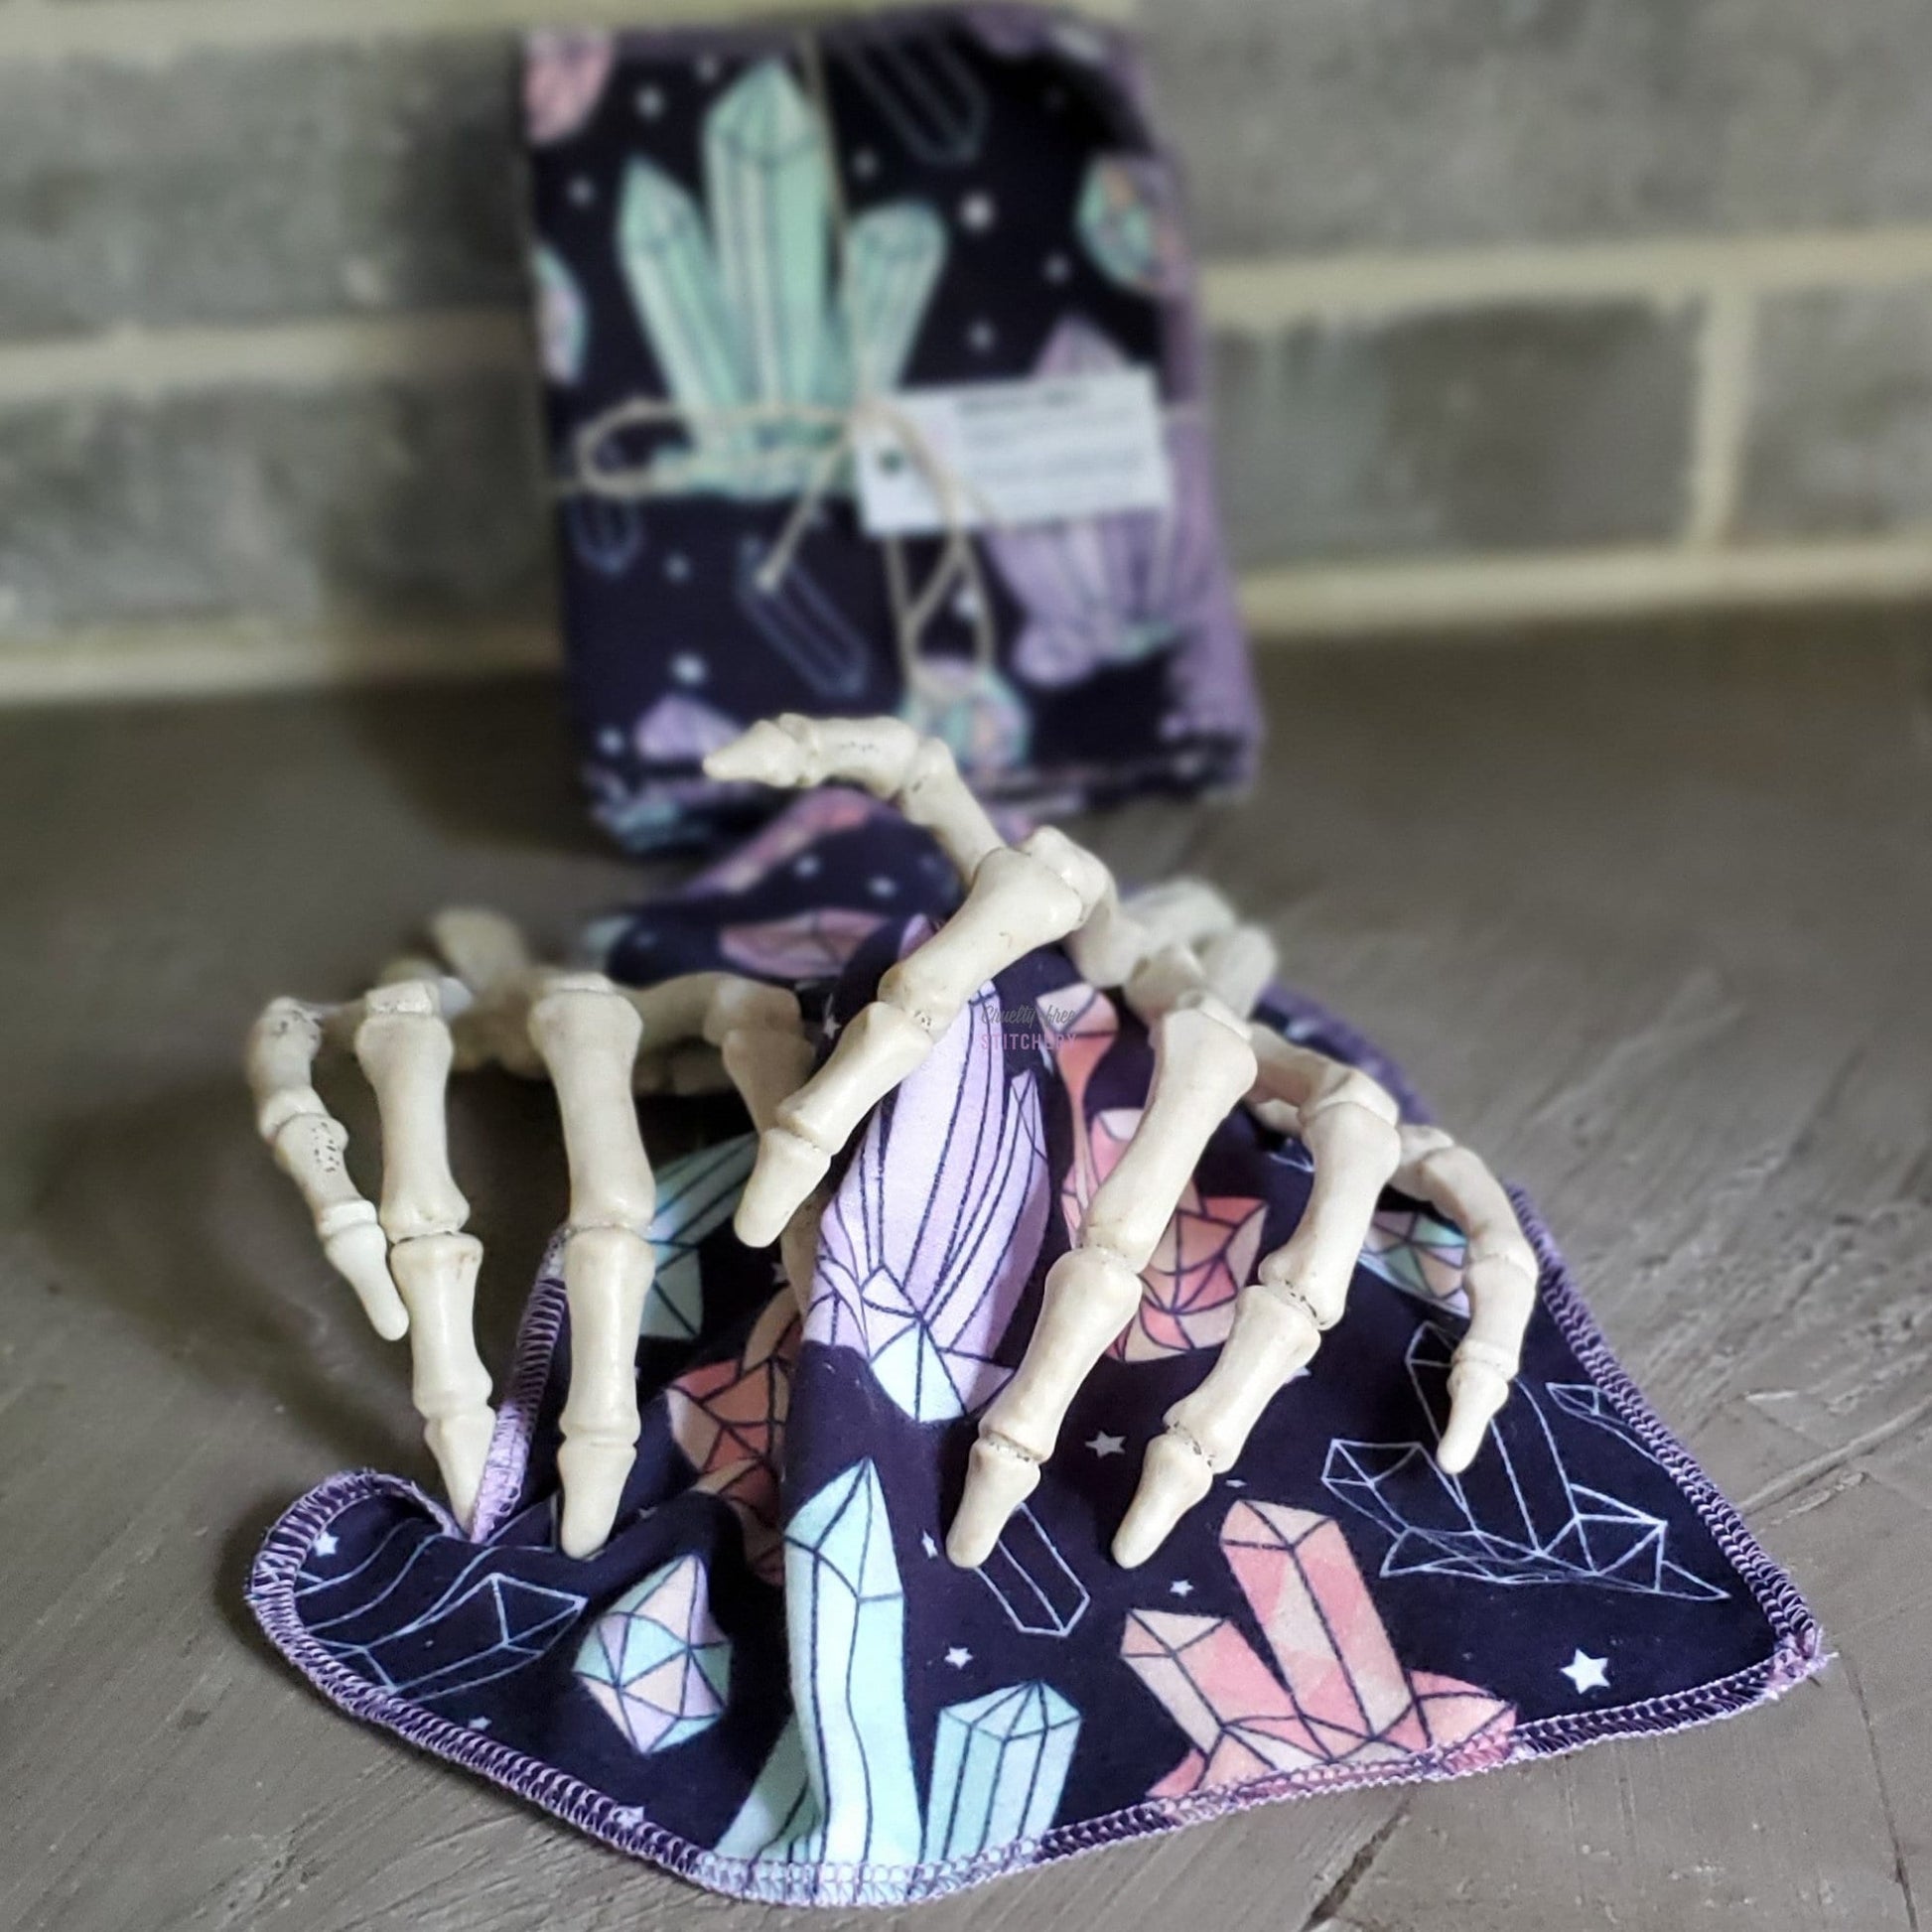 A crystals print NonPaper Towel with two fake skeleton hands as if they are drying off with it. A bundled pack of them is blurred in the background.